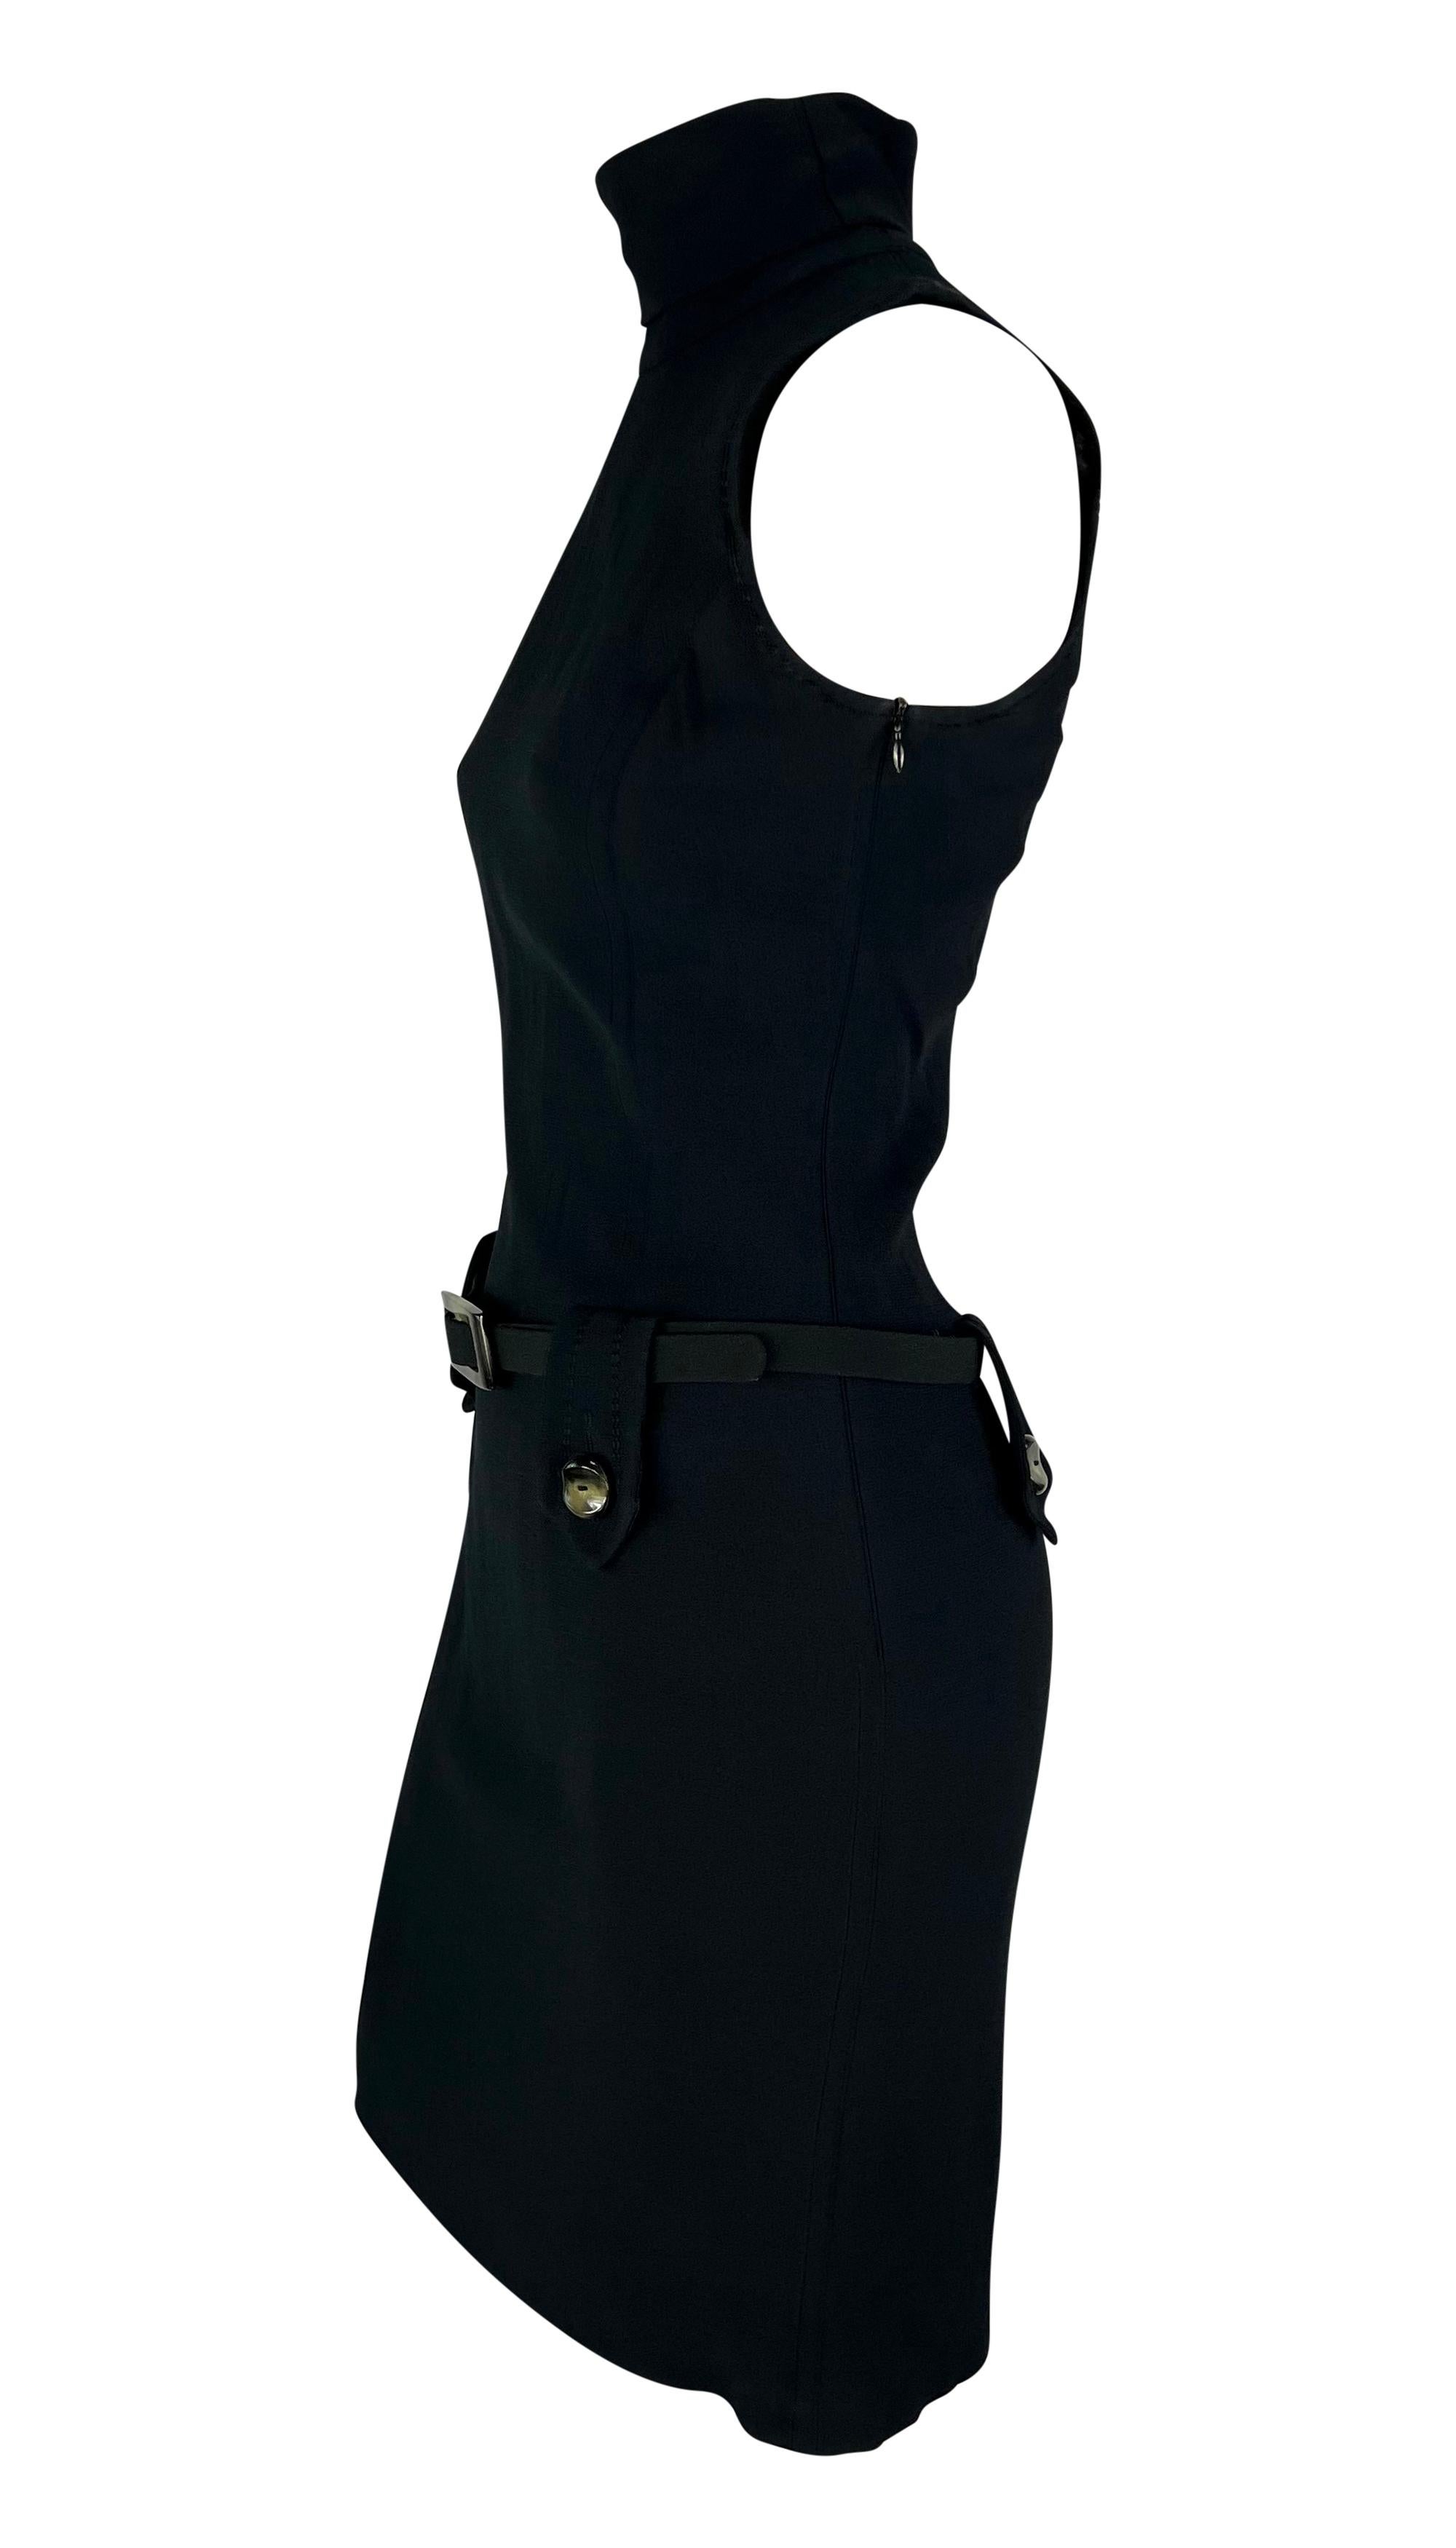 1990s Paco Rabanne Bond Girl Mock Neck Belted Sleeveless Navy Black Dress In Good Condition For Sale In West Hollywood, CA